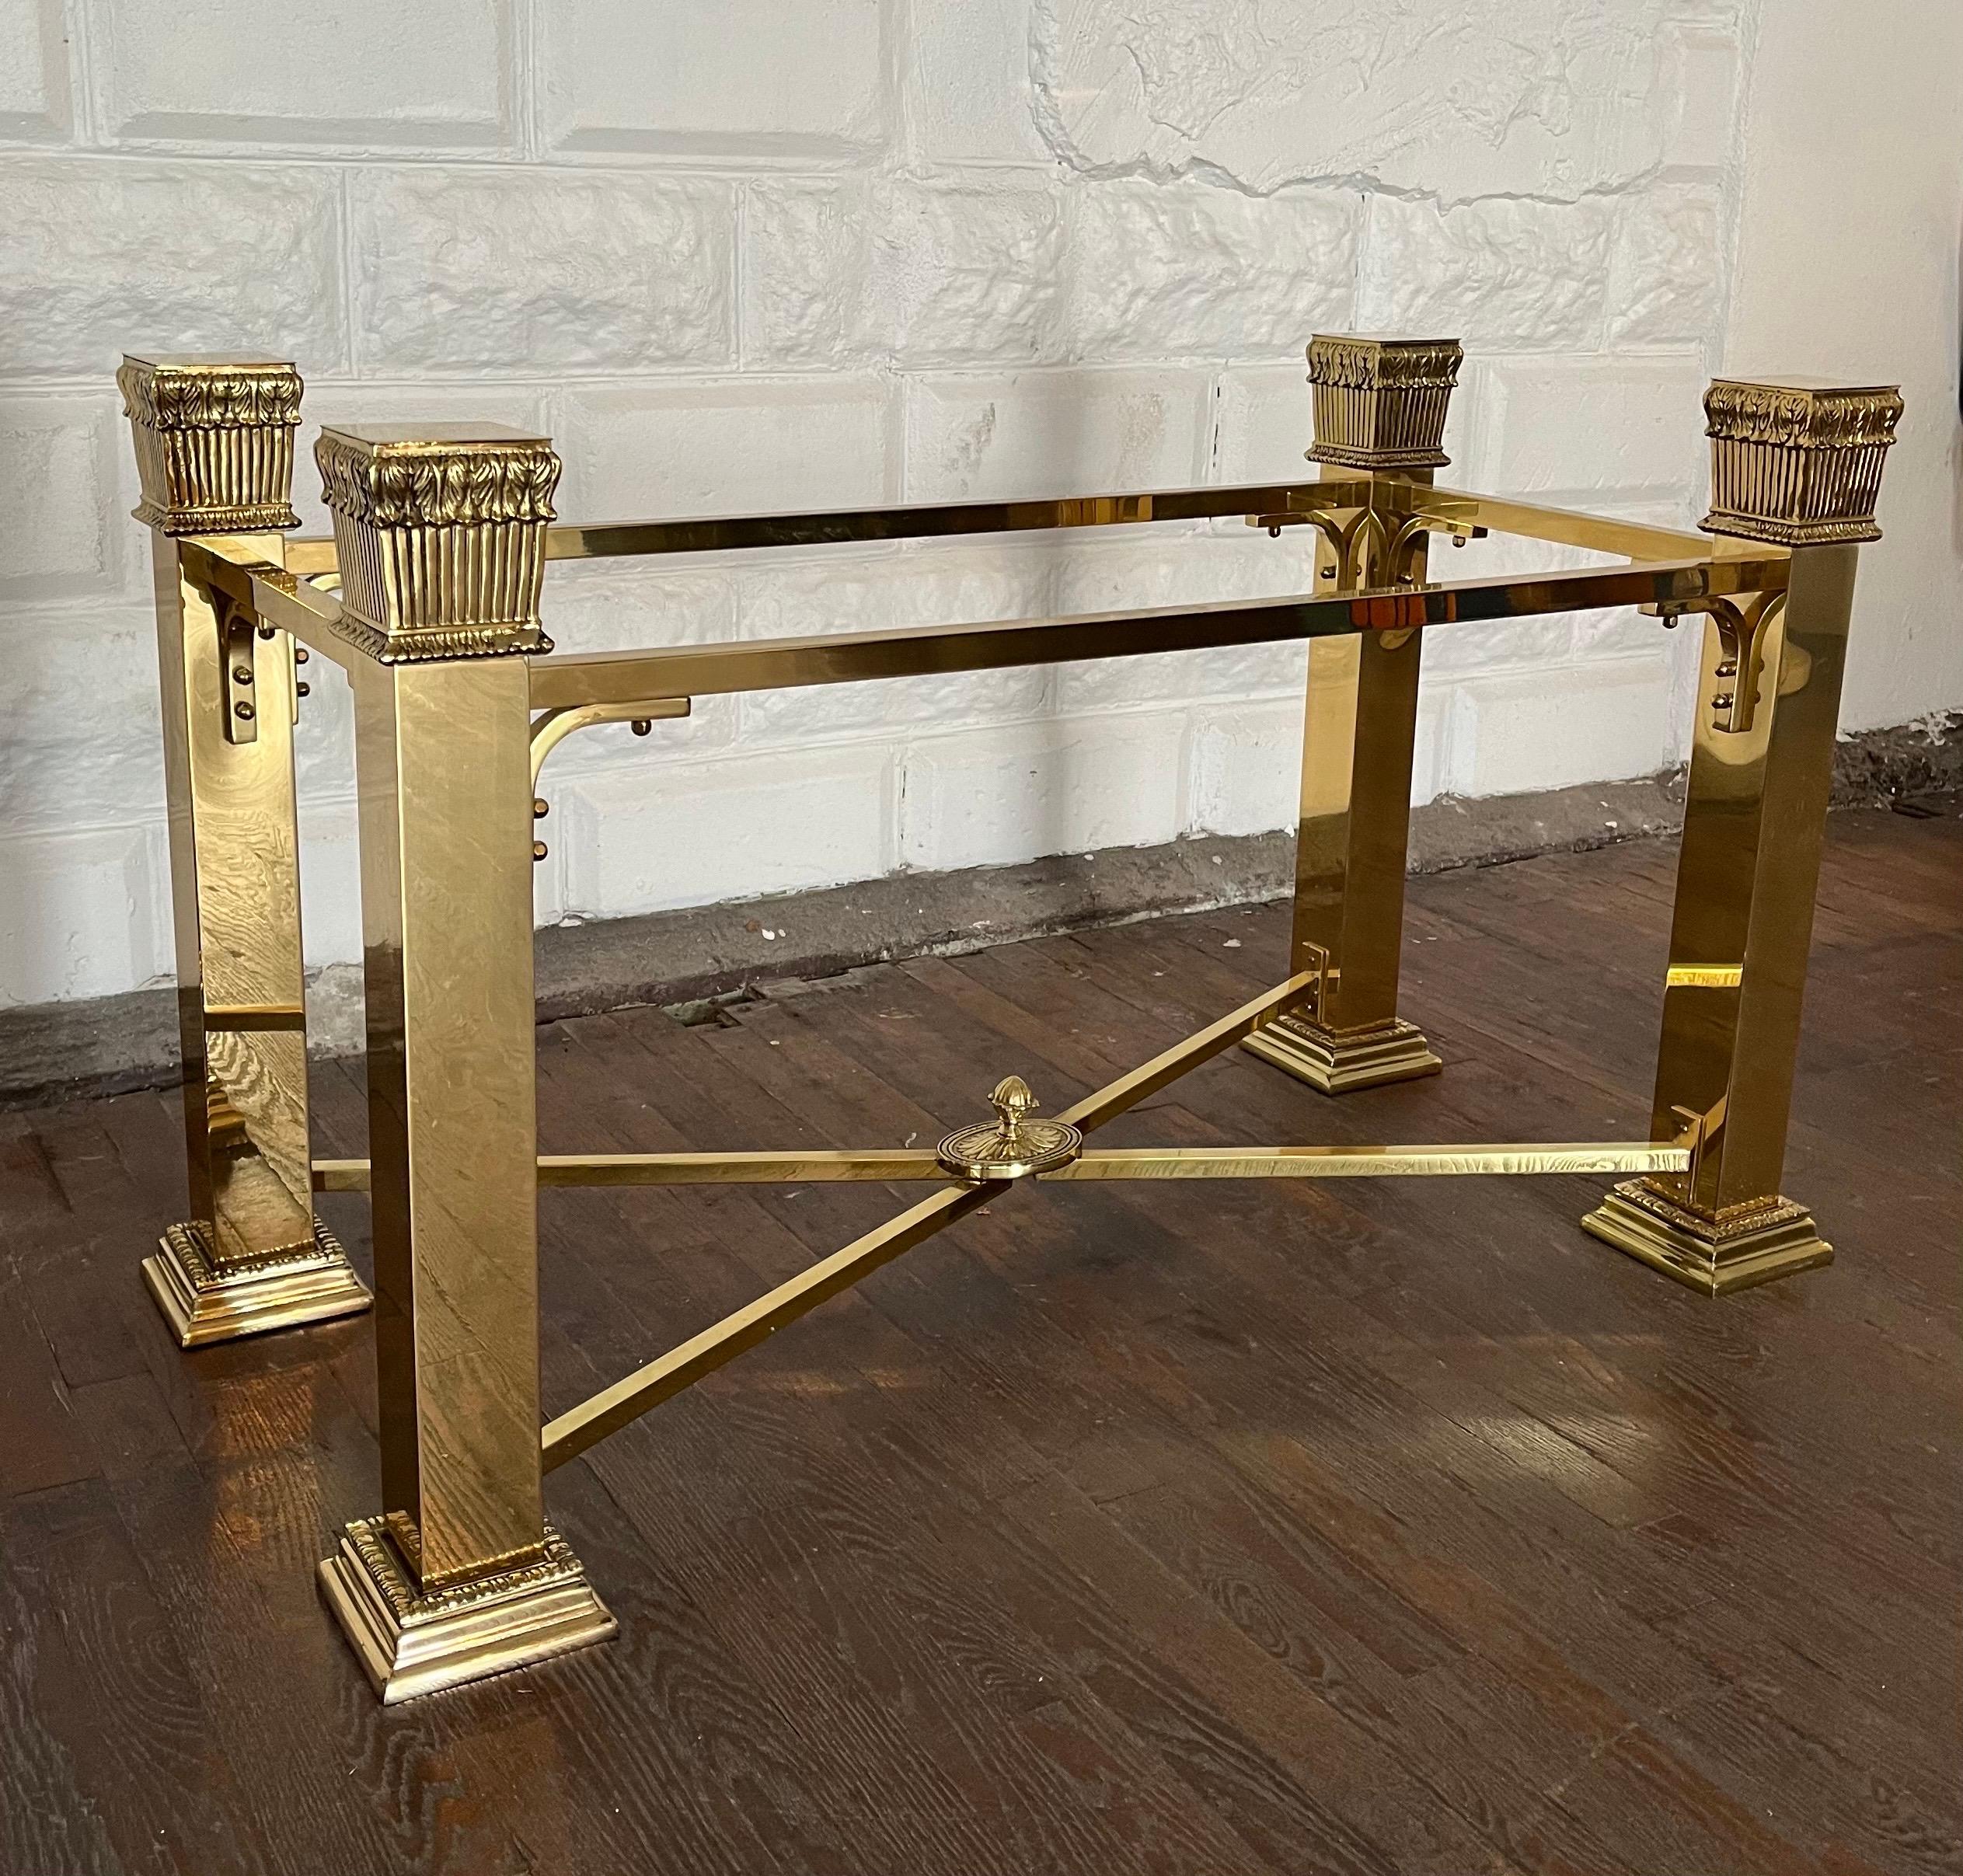 Beautiful Neoclassical Italian Brass dining table base. Great deep detail with four square columns with acanthus leaf design and cross stretcher with center finial. Supports a heavy 1